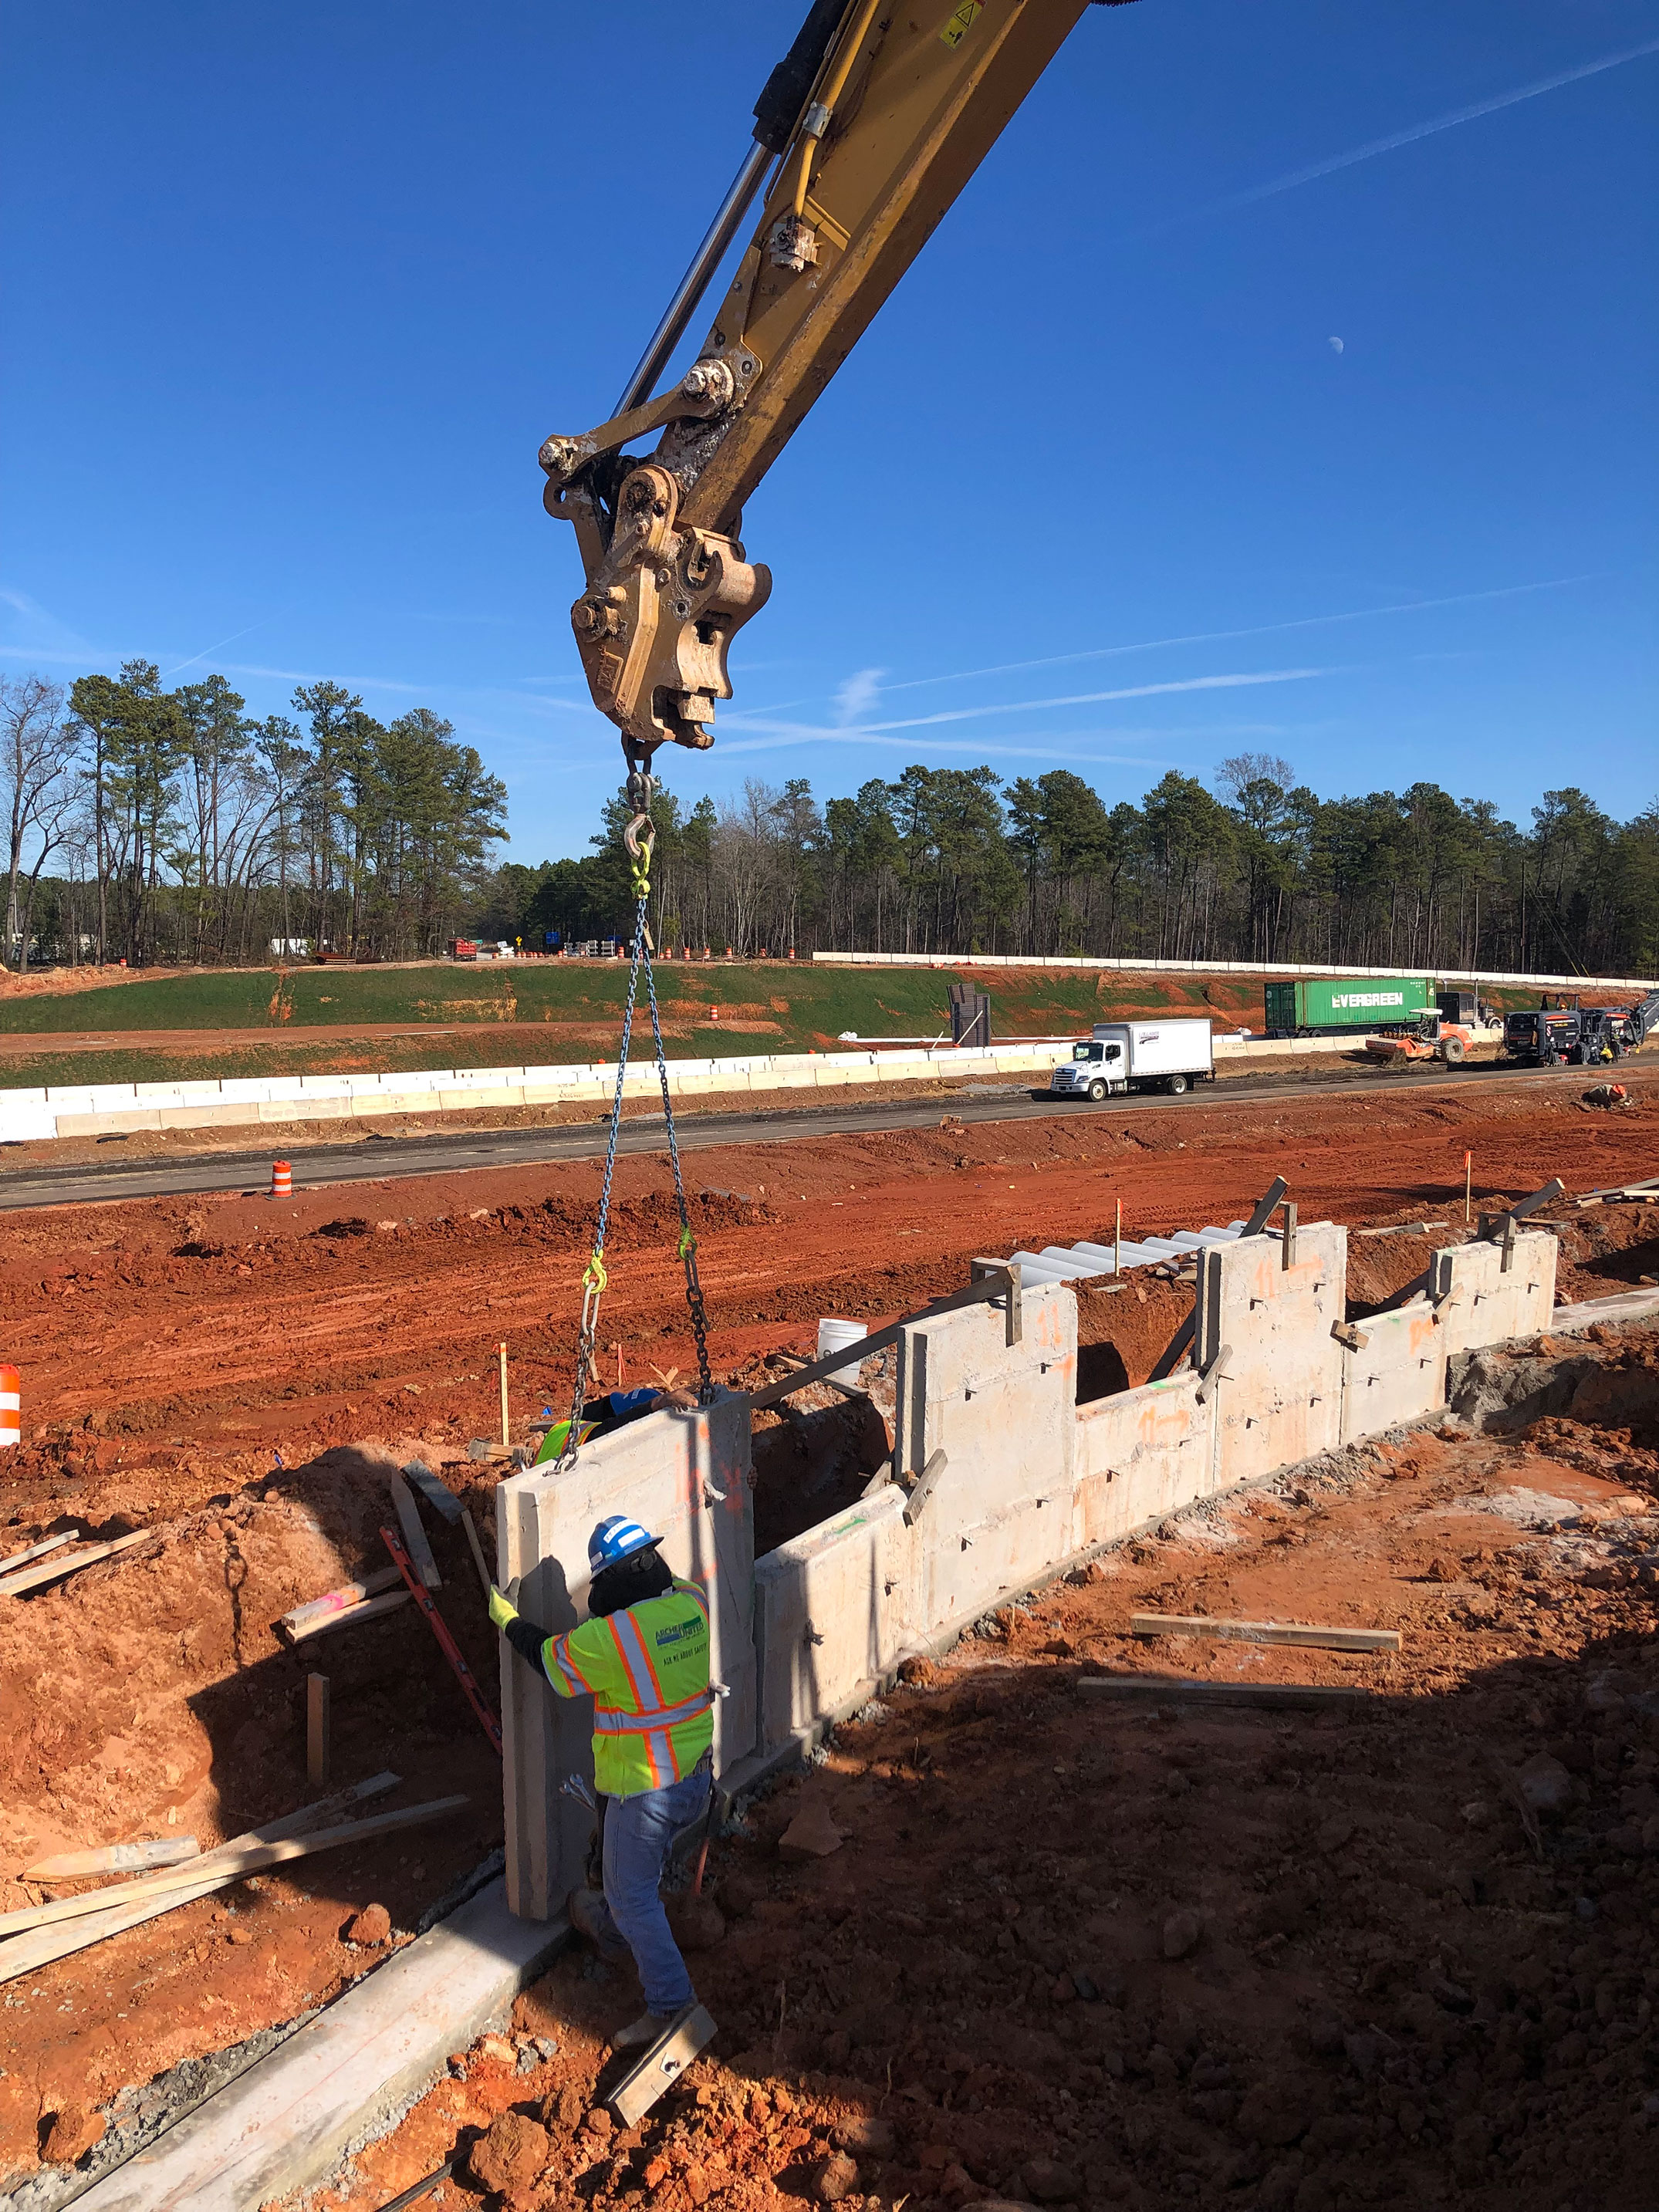 Retaining wall panels are being placed for the construction of the new roundabout at the intersection of Crooked Creek Road and Columbia Ave.  Studies have shown that roundabouts are safer than traditional stop sign or traffic signal controlled intersections.